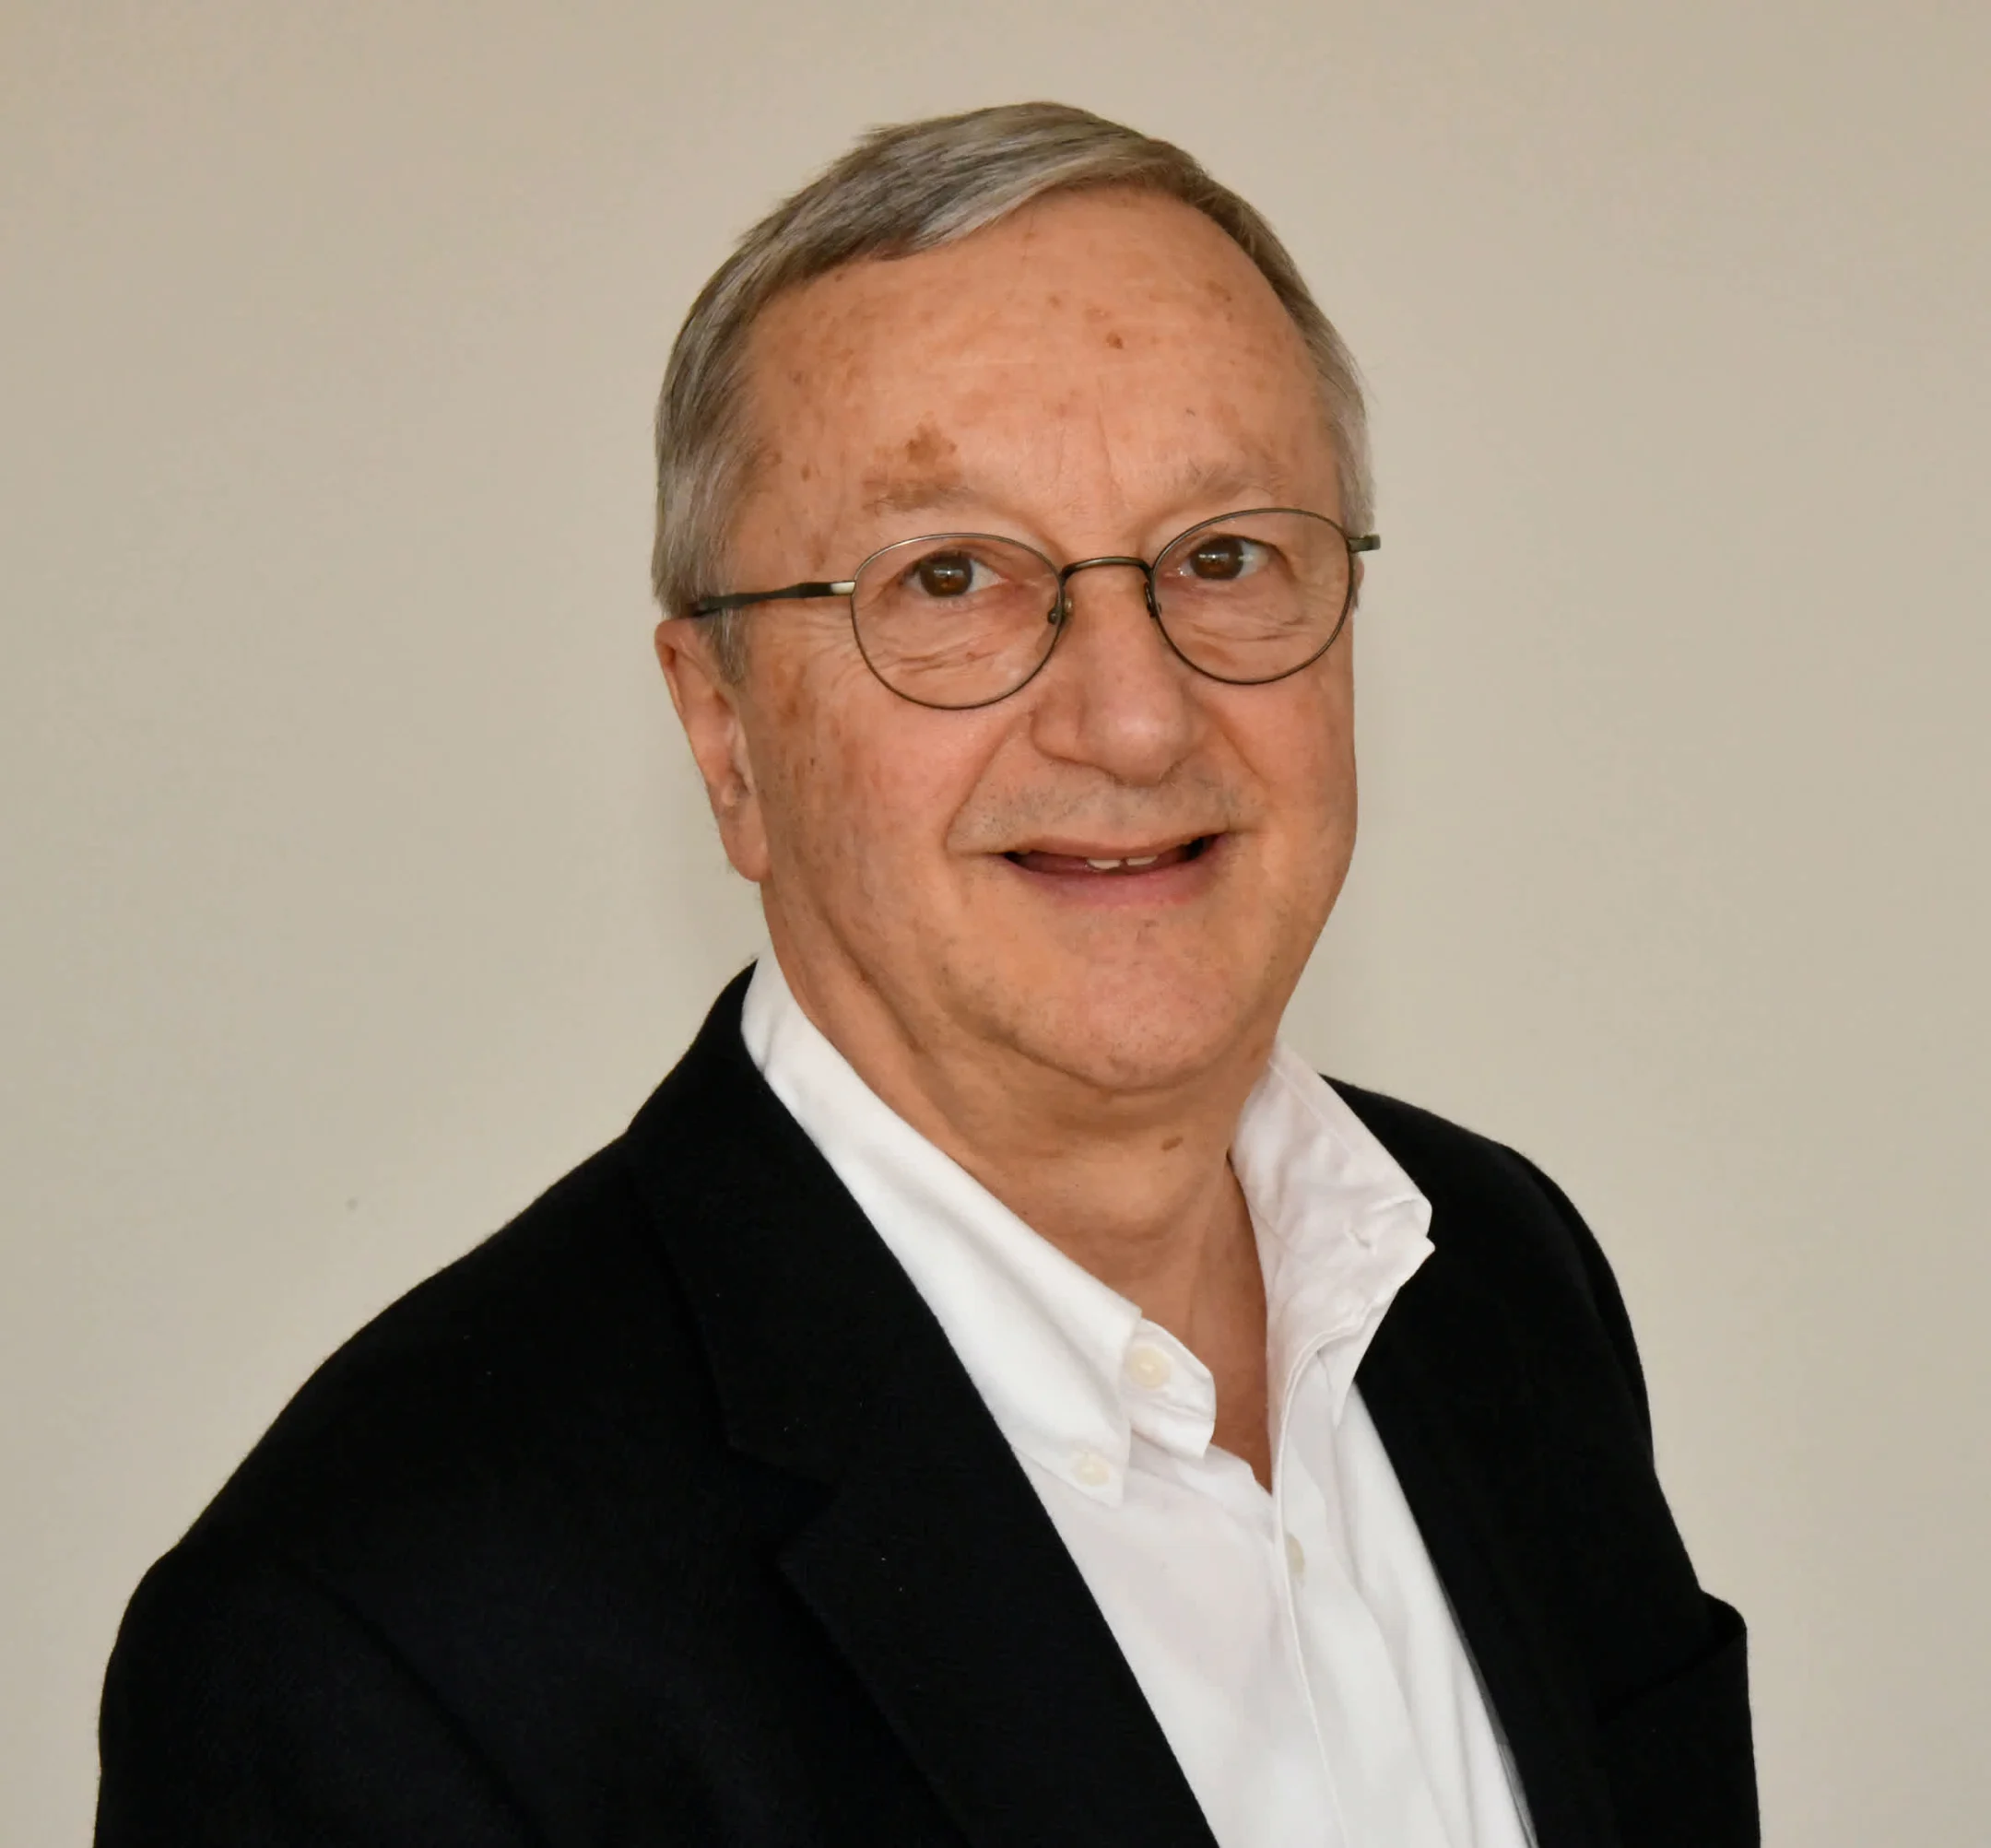 Jean-Francois Baril, Co-Founder, Chairman and CEO